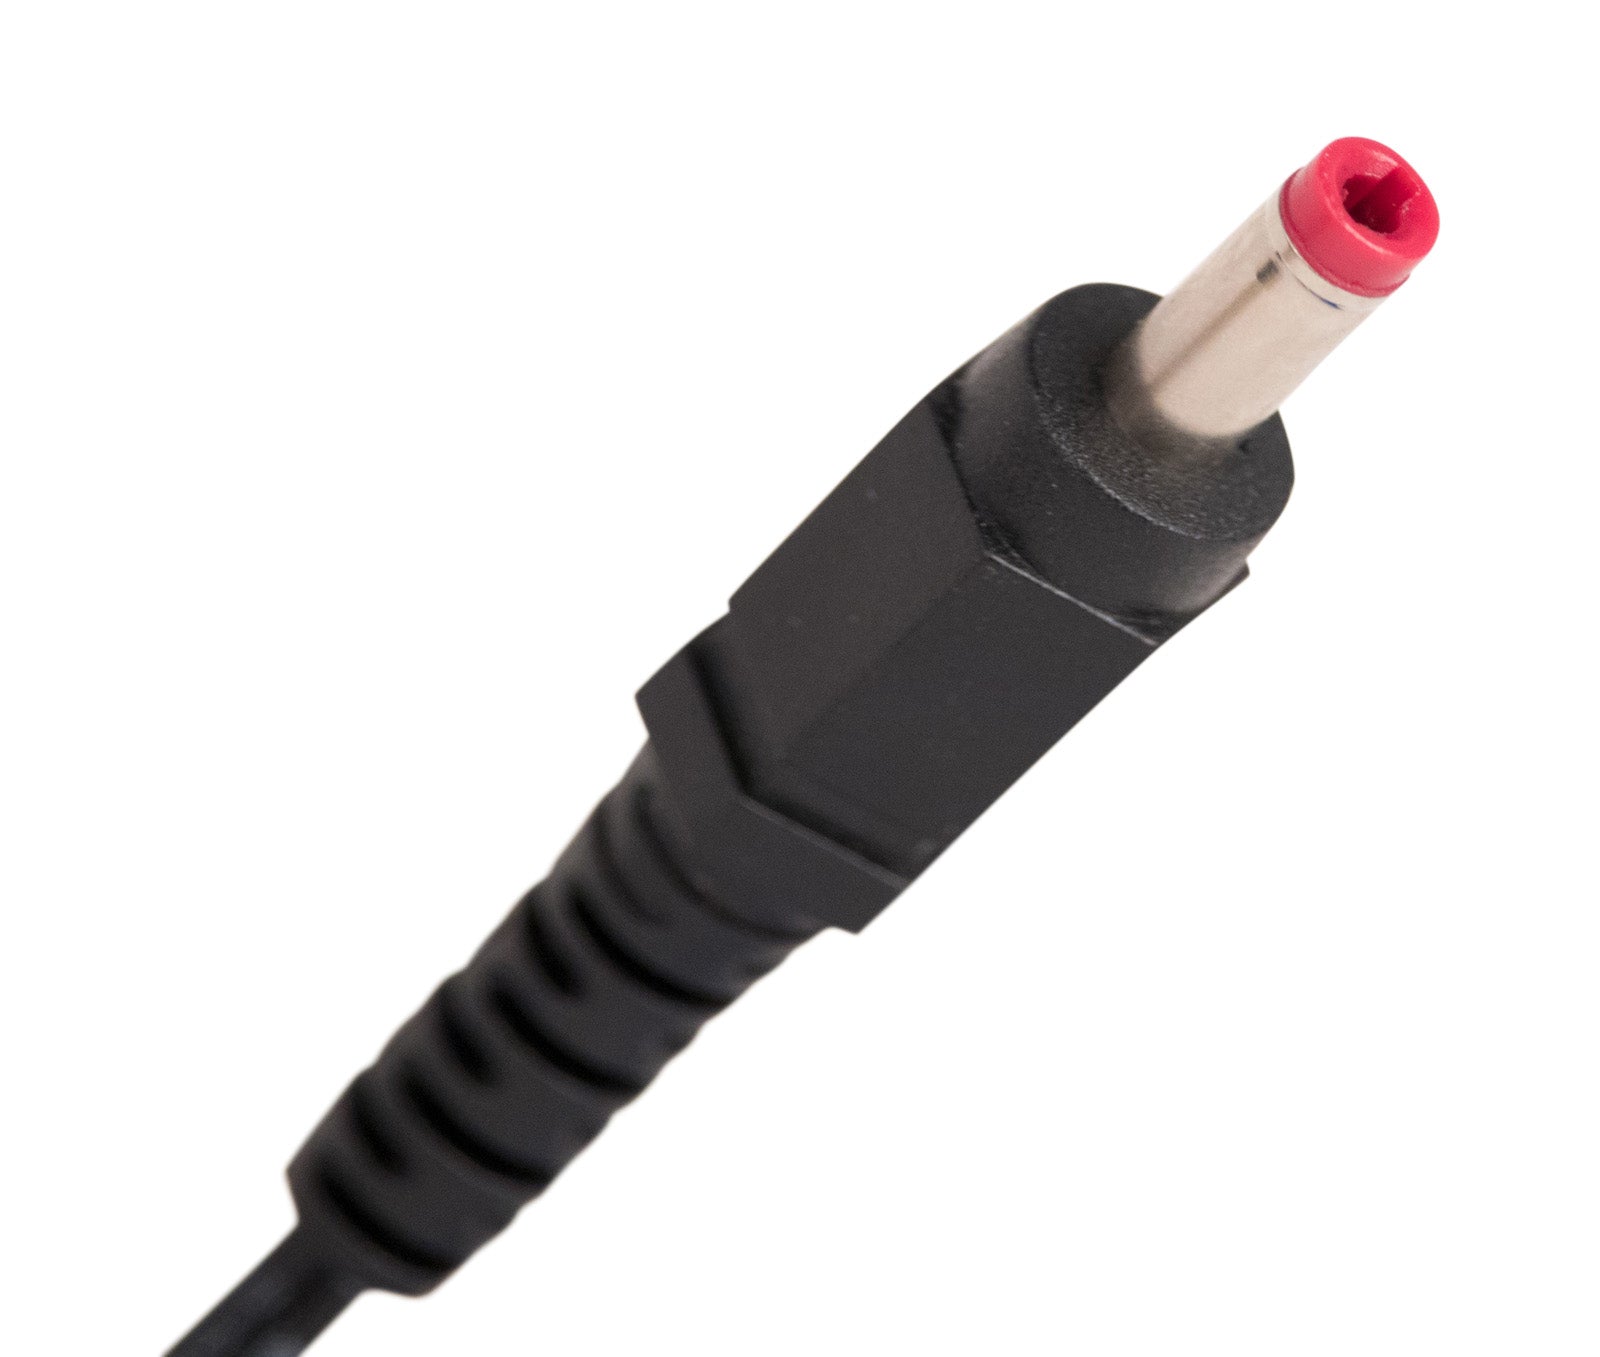 comes with a red tip connector to plug into the vehicle cradle